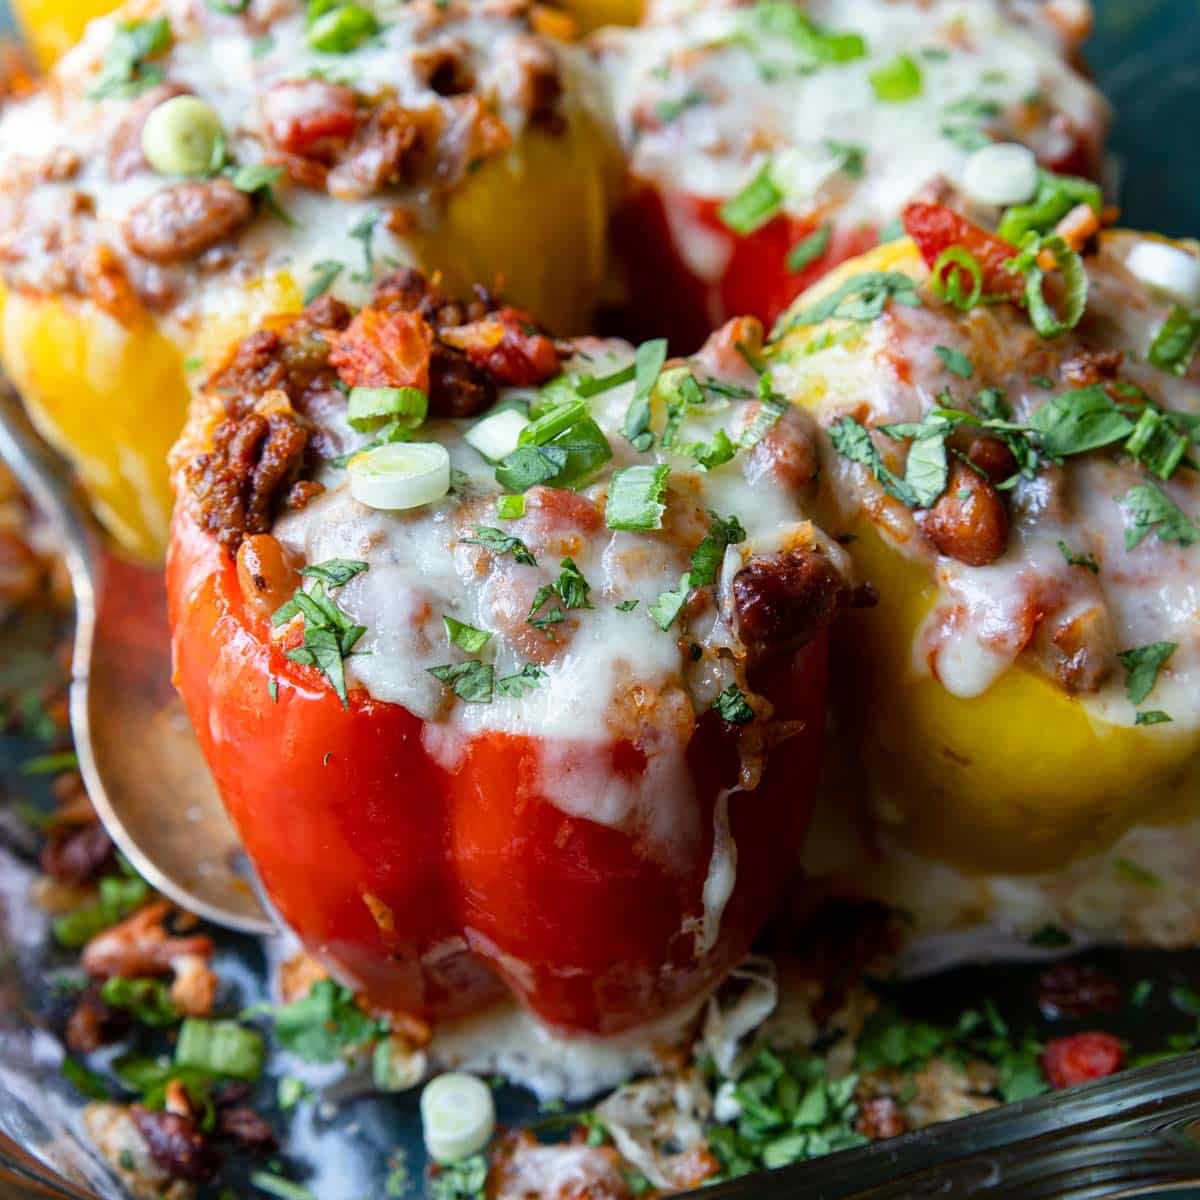 a red bell pepper filled with ground beef, rice and bean mixture